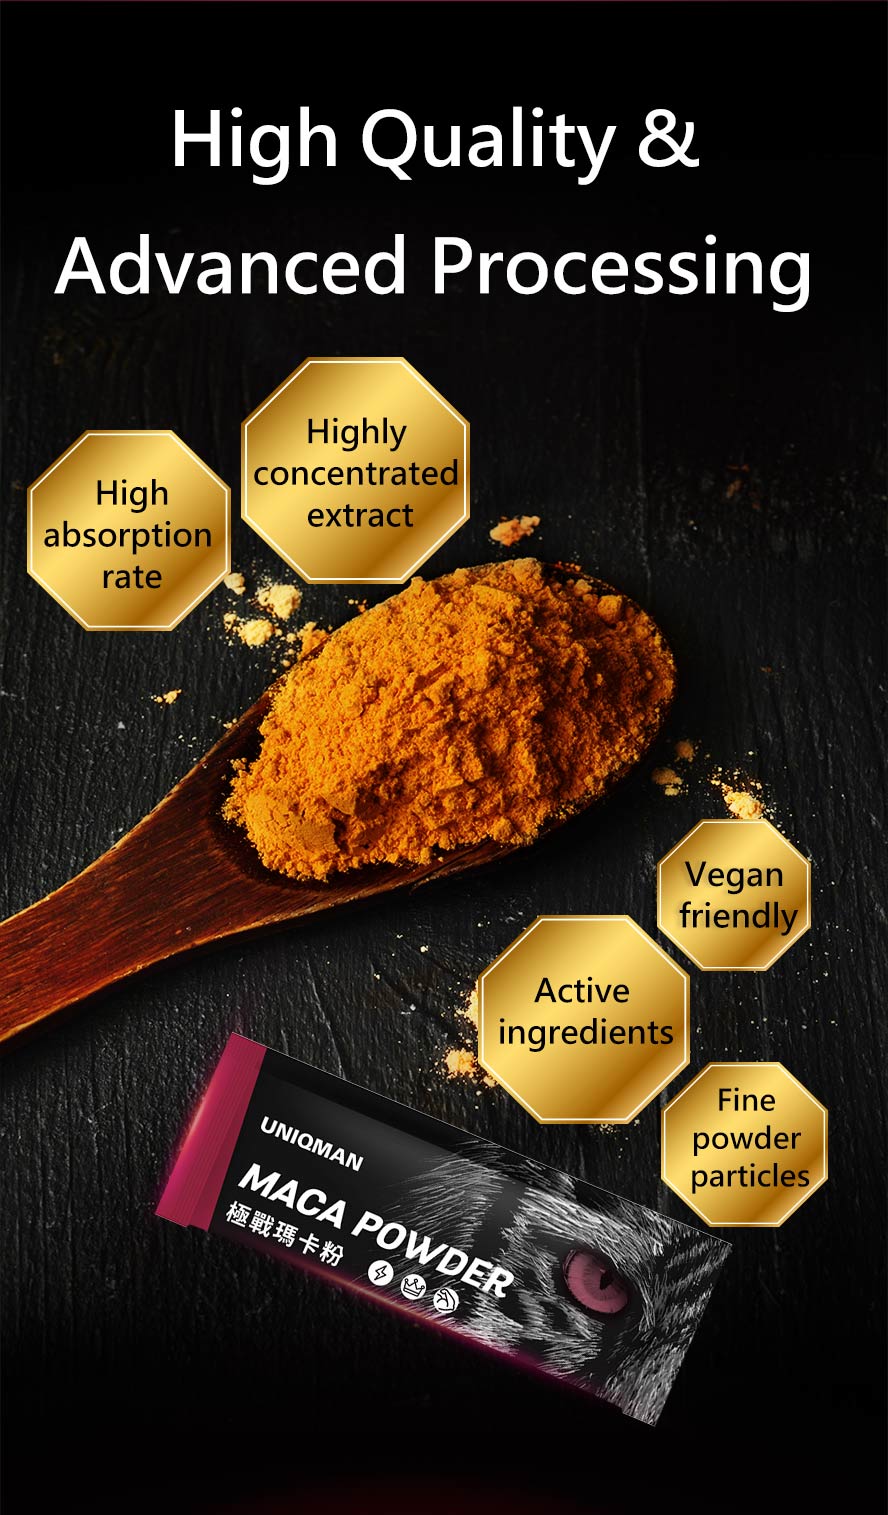 Maca root powder is very nutritious, and is a great source of several important vitamins and minerals.